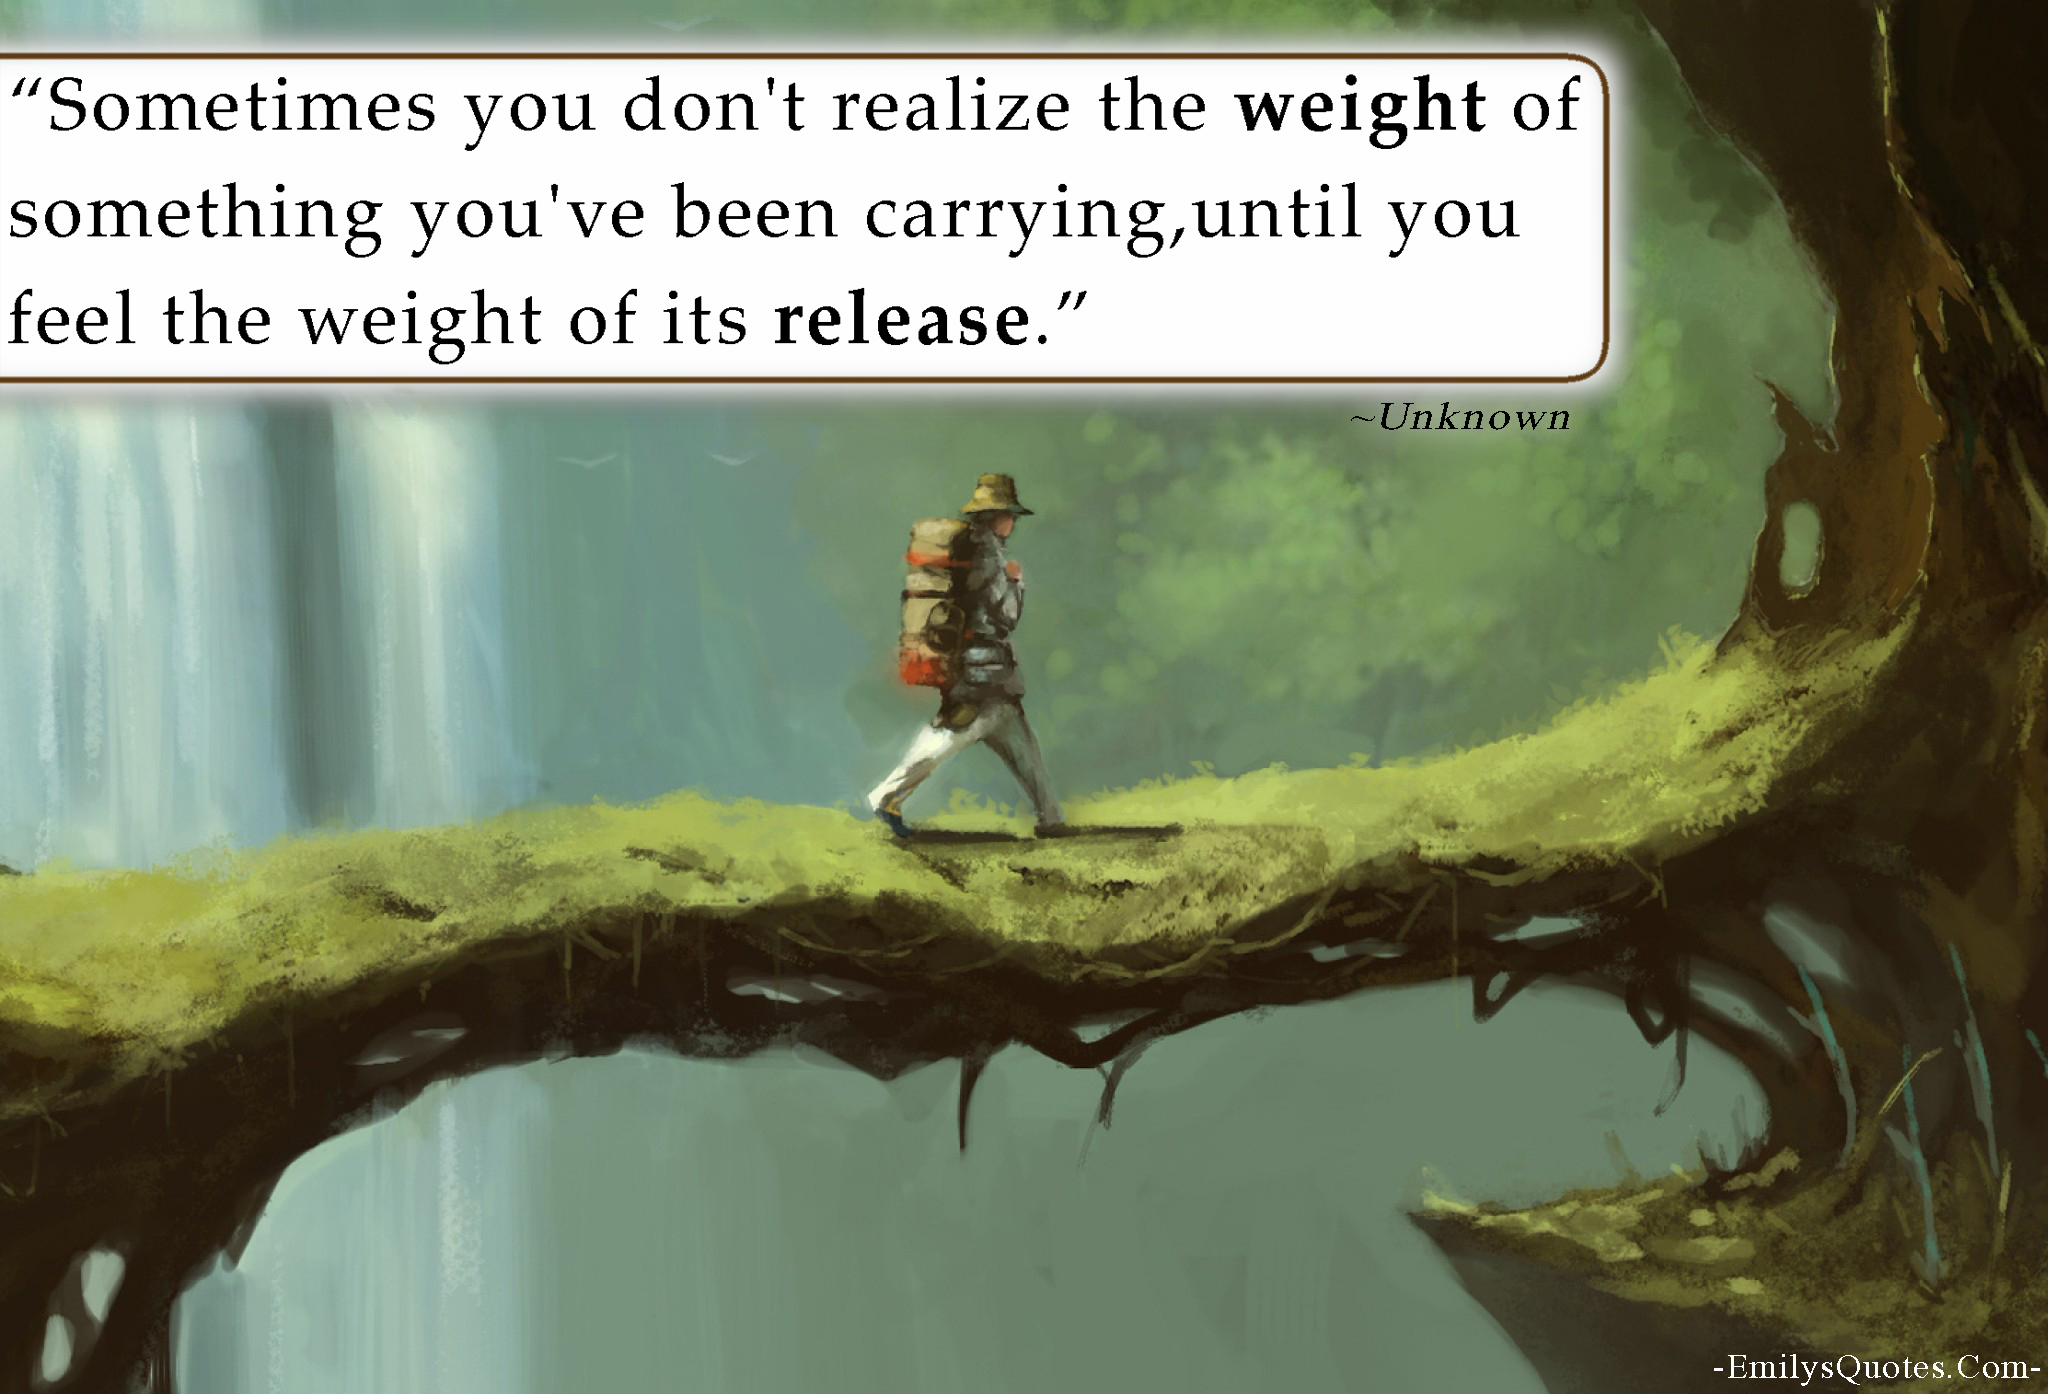 Sometimes you don't realize the weight of something you've been